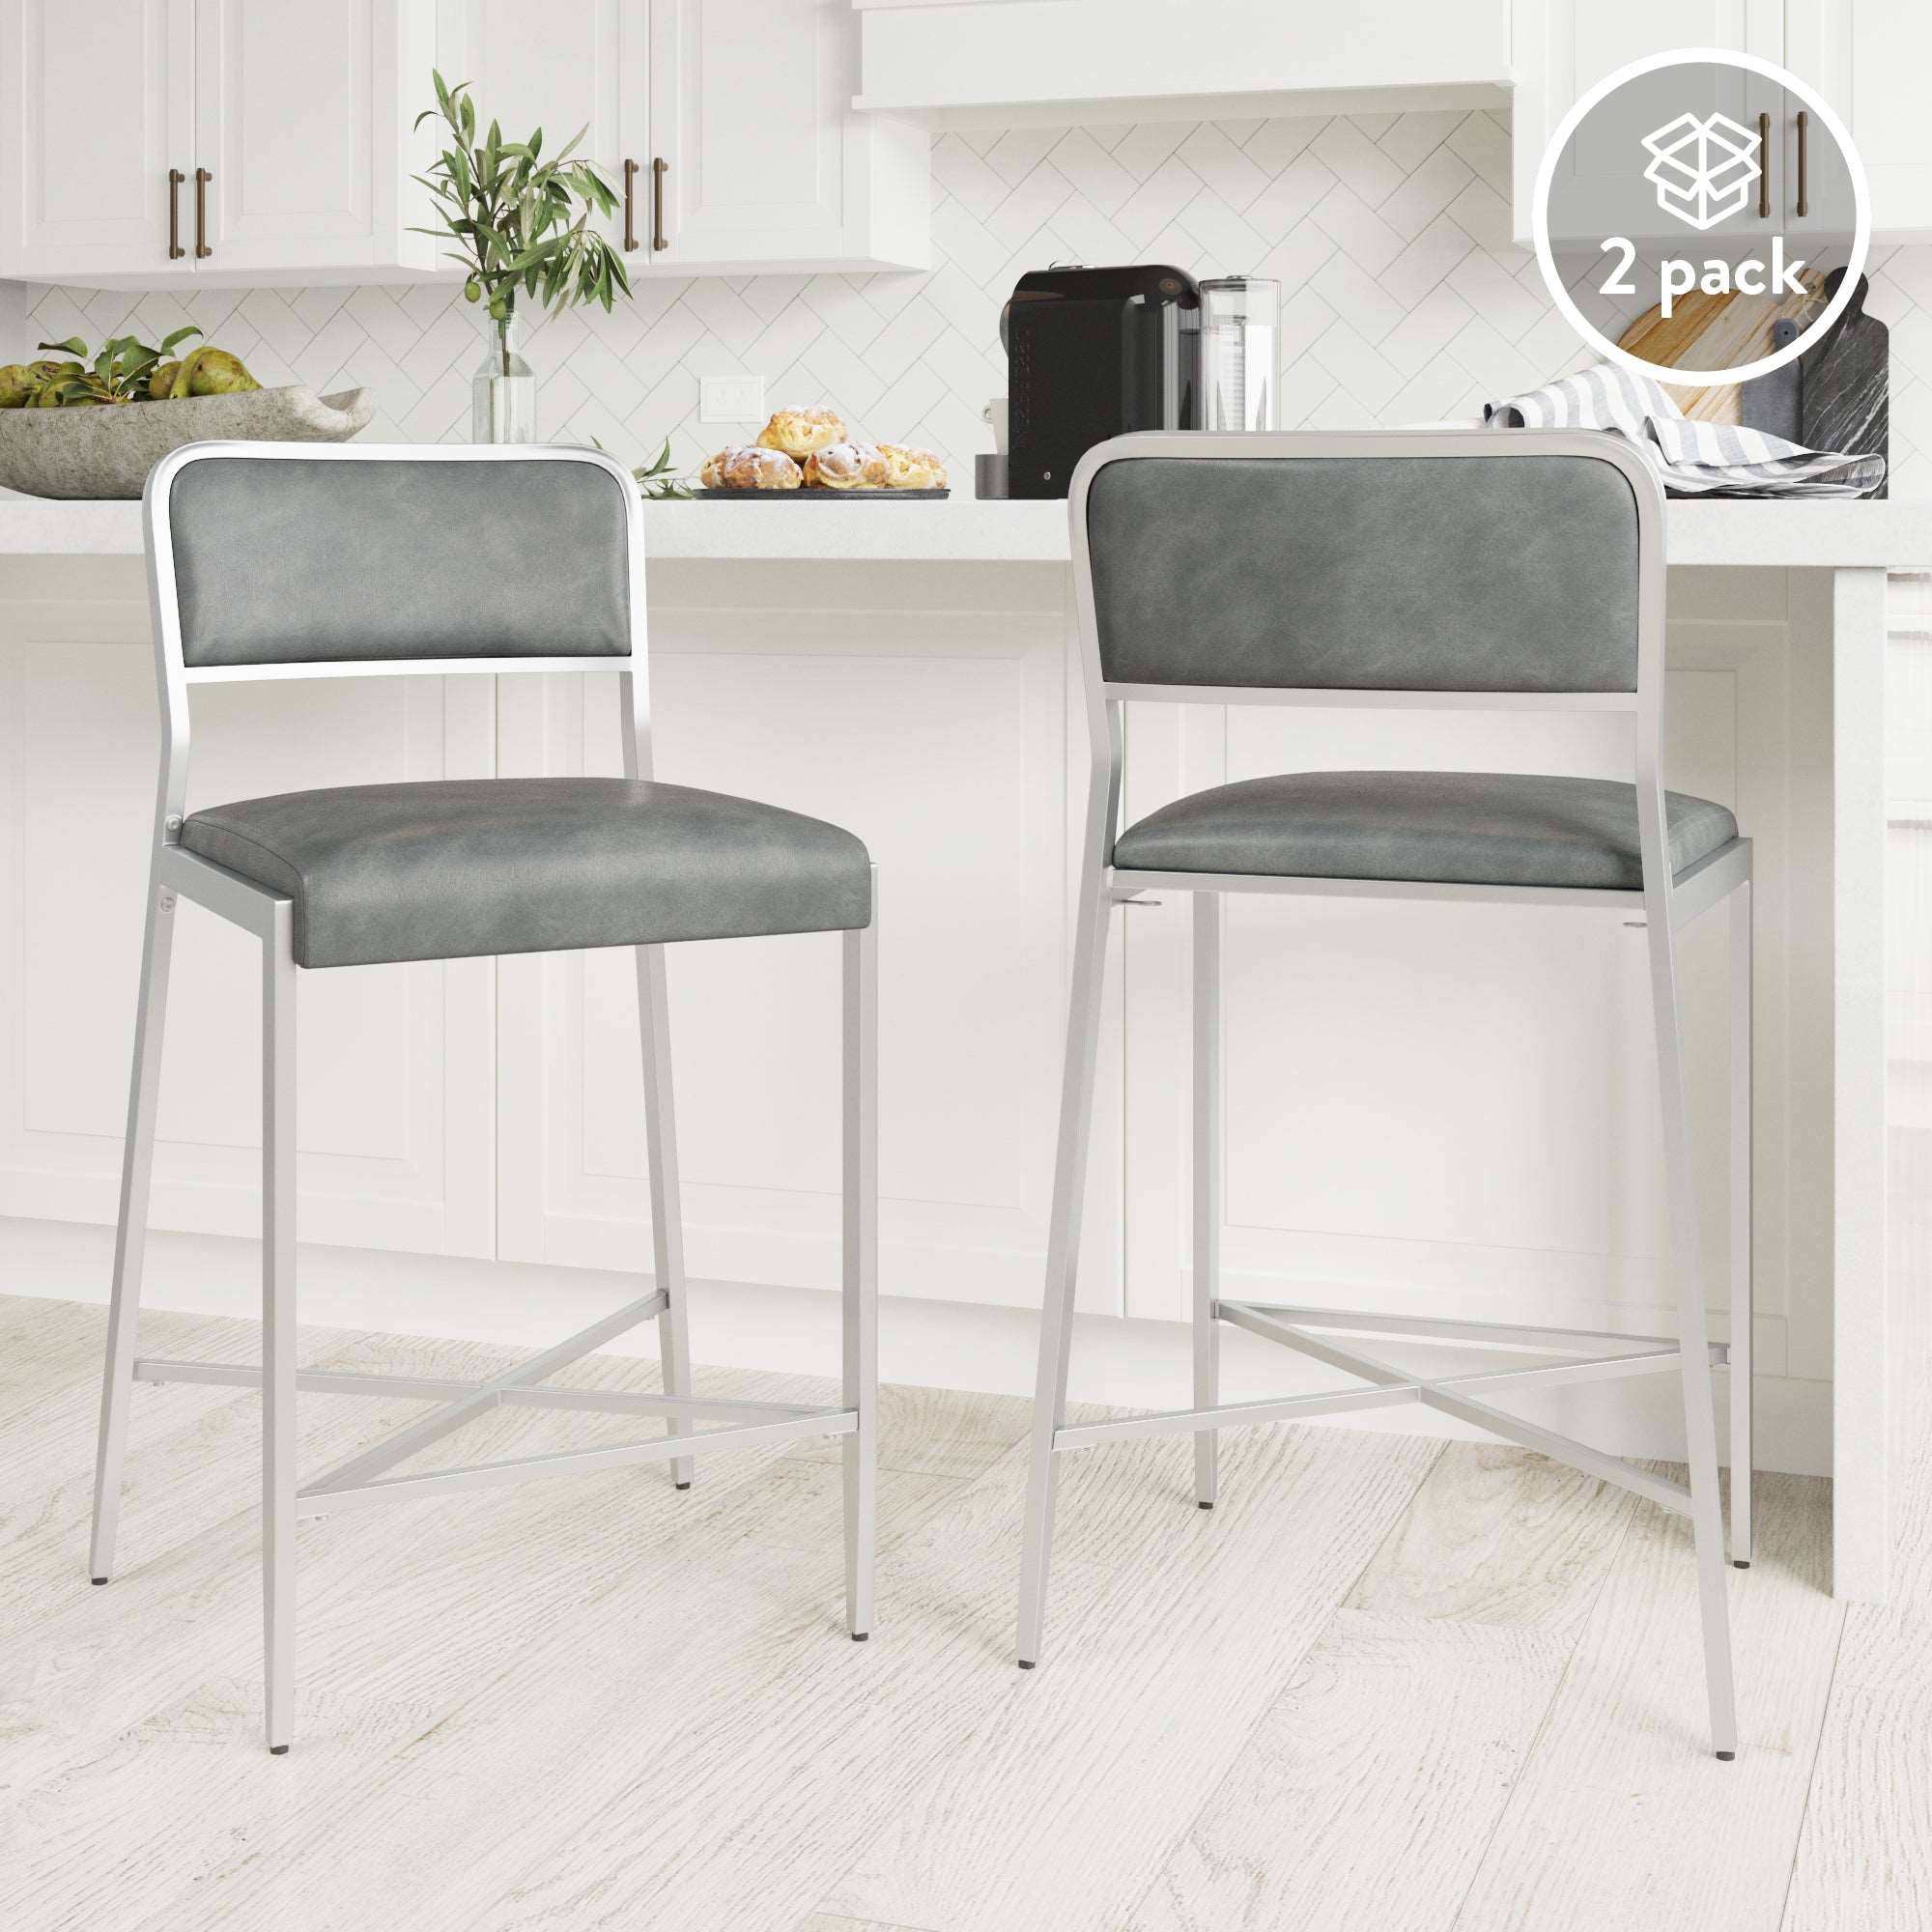 Faux Leather Counter Height Bar Stools Set Pewter-Chrome